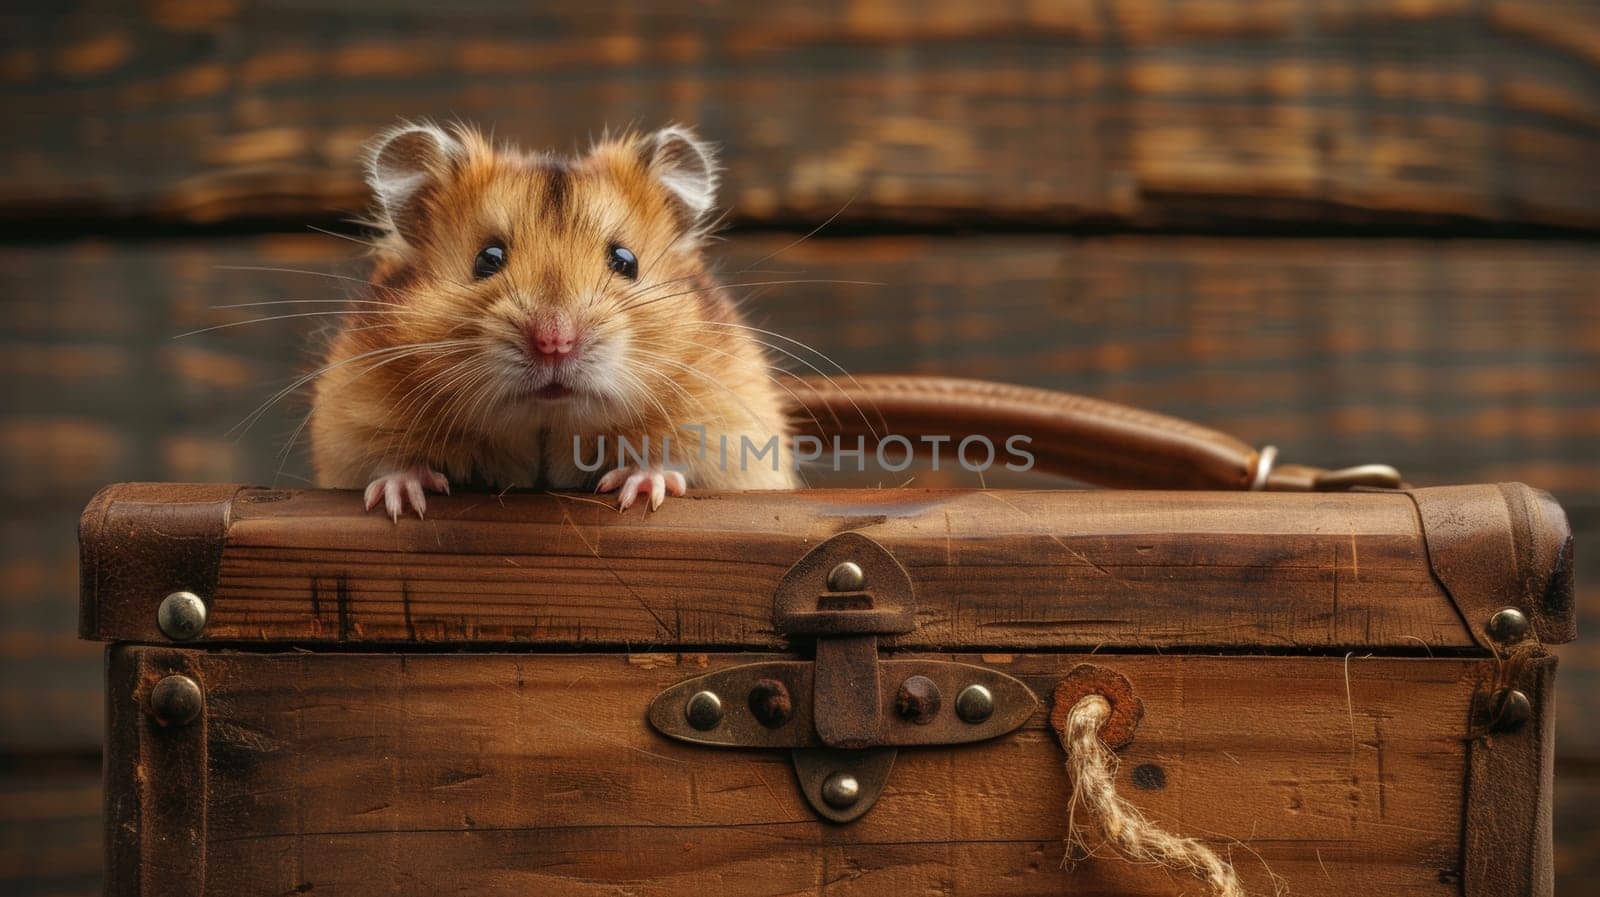 A brown and white hamster sitting on top of a wooden box